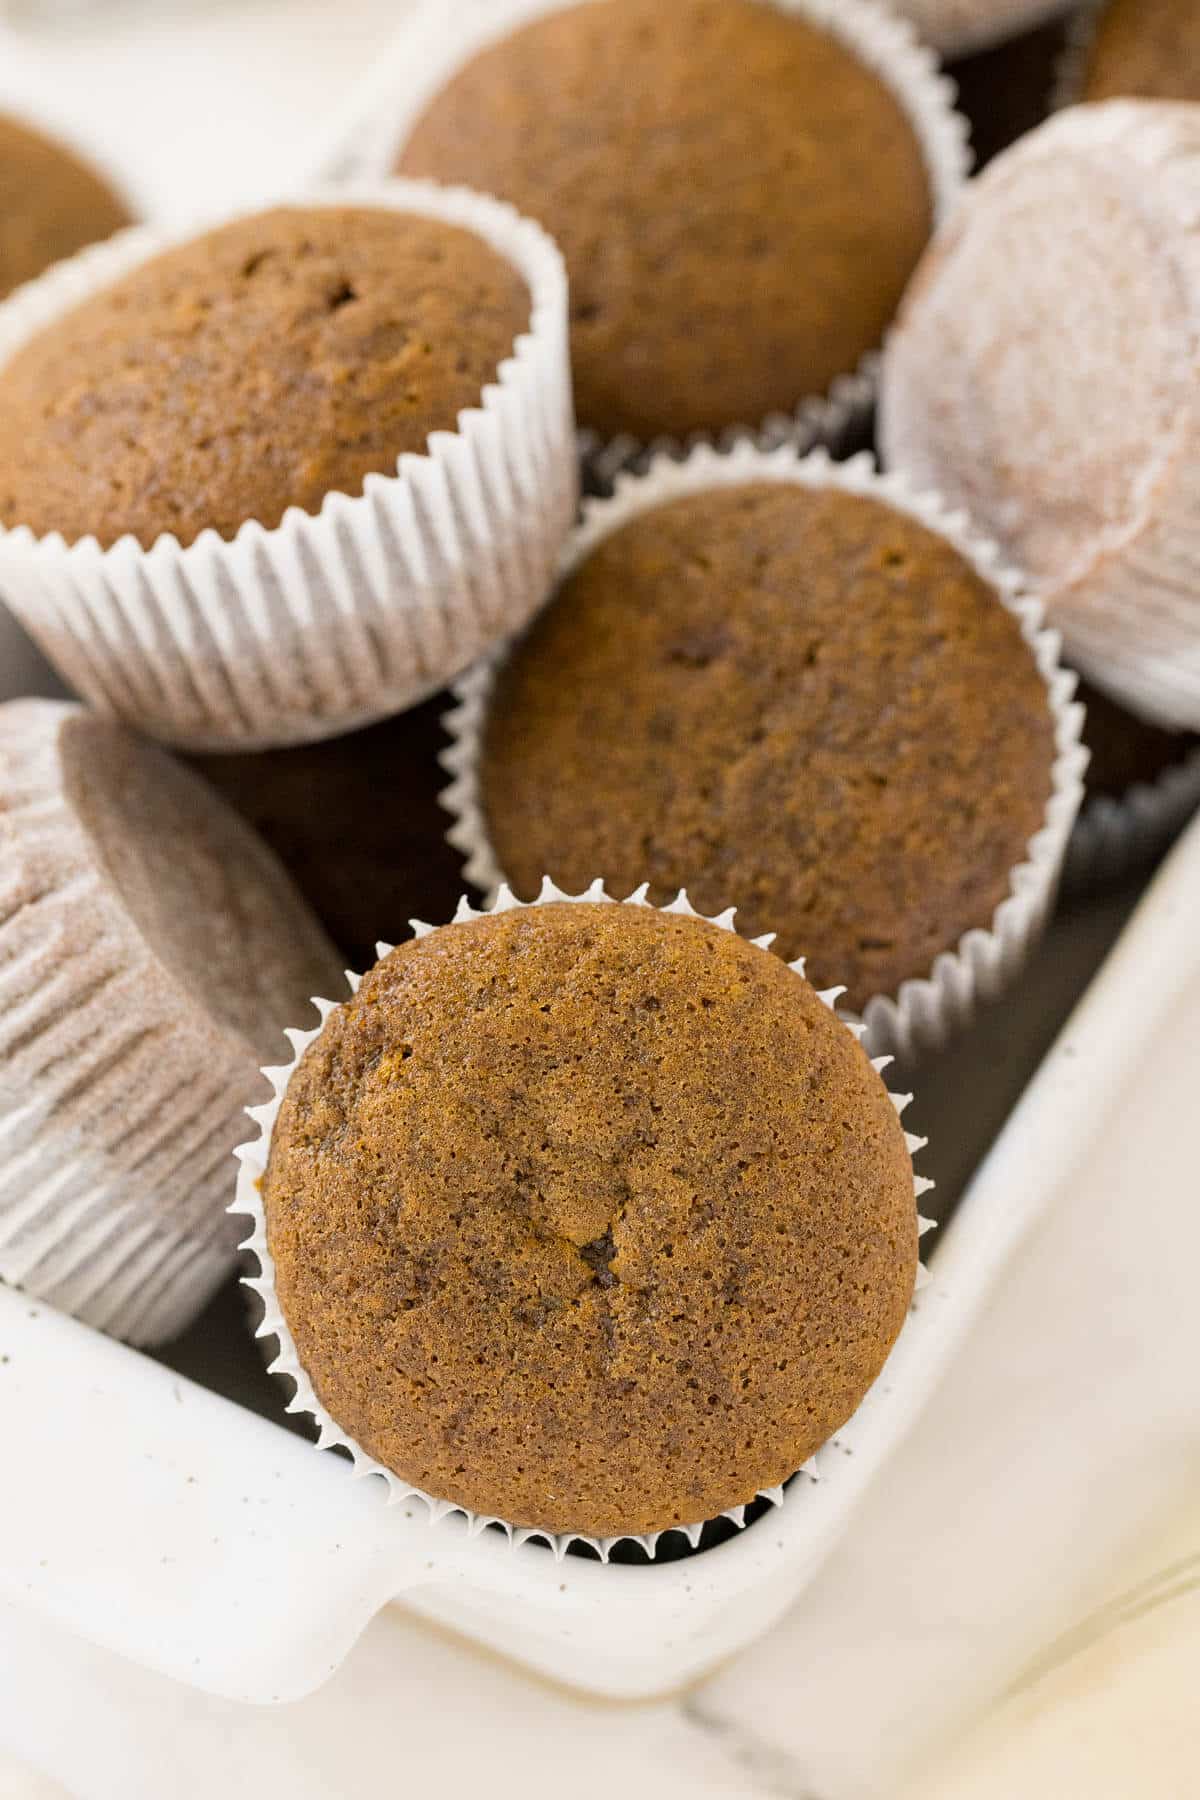 A pile of gingerbread muffins in a container.